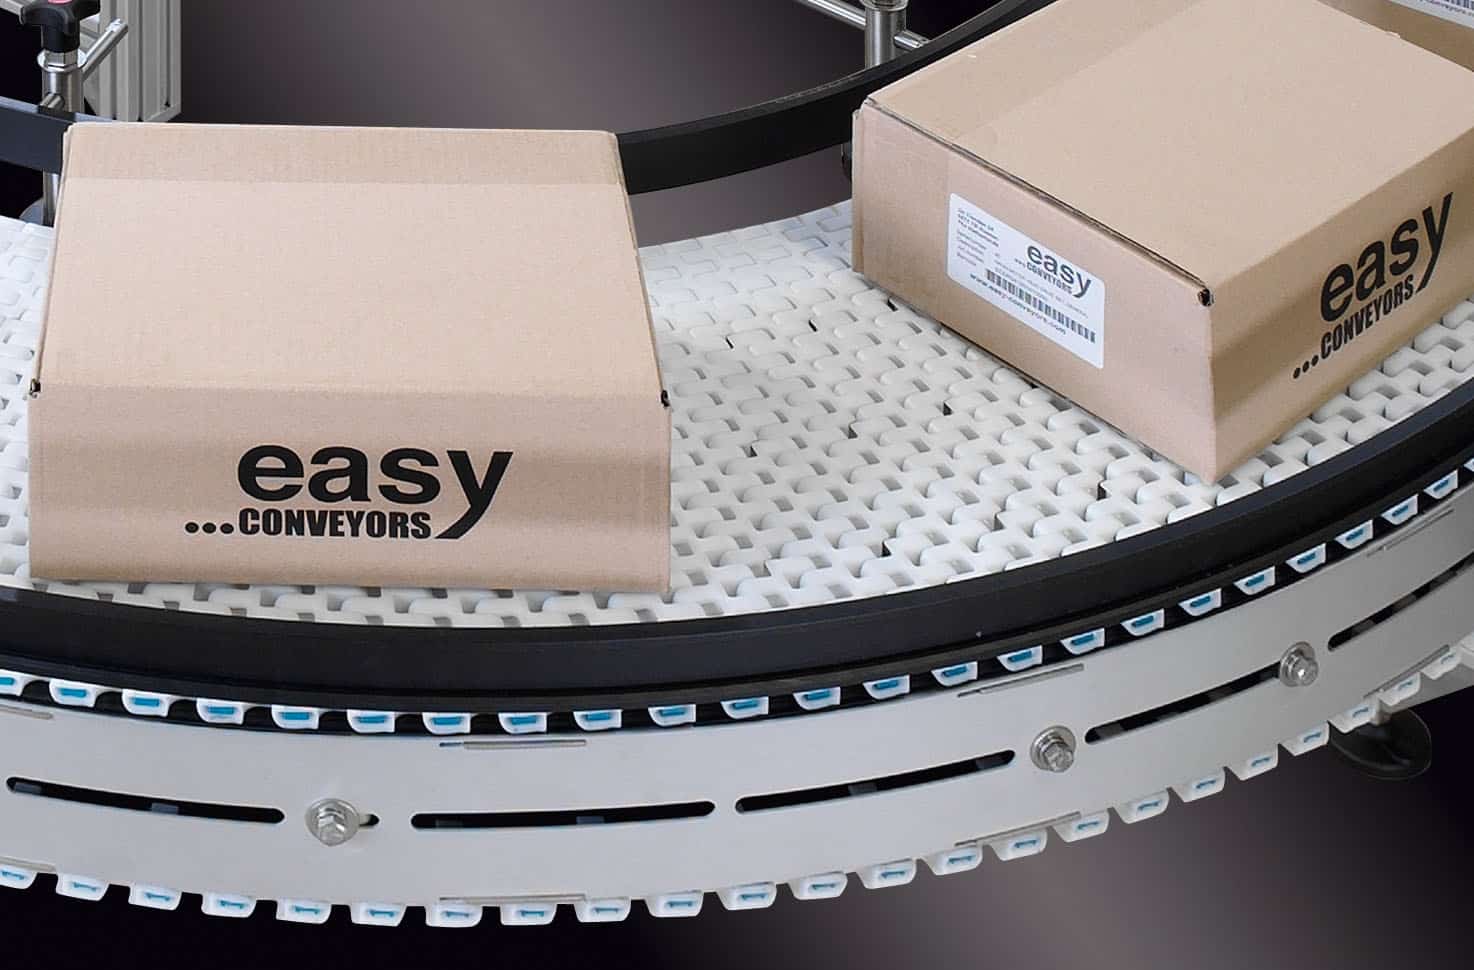 Example of curved EMBS chain conveyors, transporting cardboard boxes.